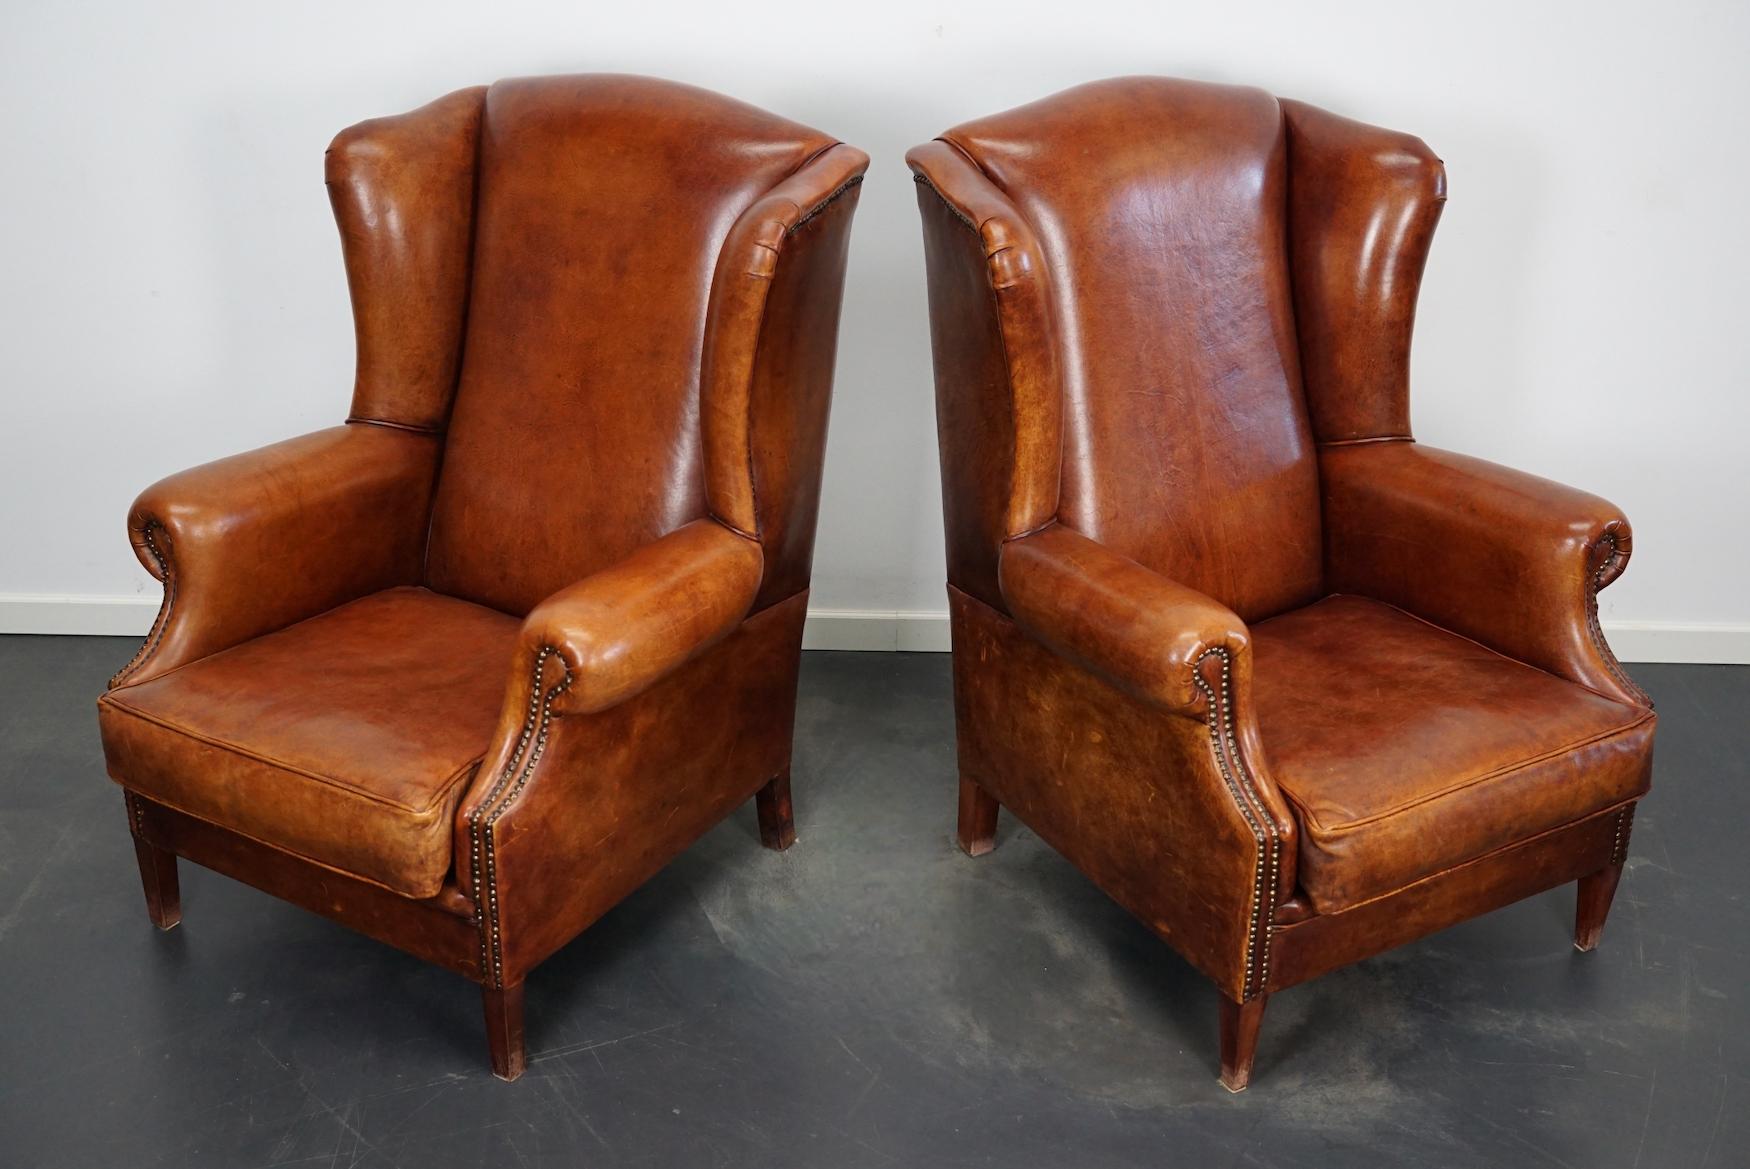 Industrial Vintage Dutch Cognac Leather Club Chairs, Set of 2 